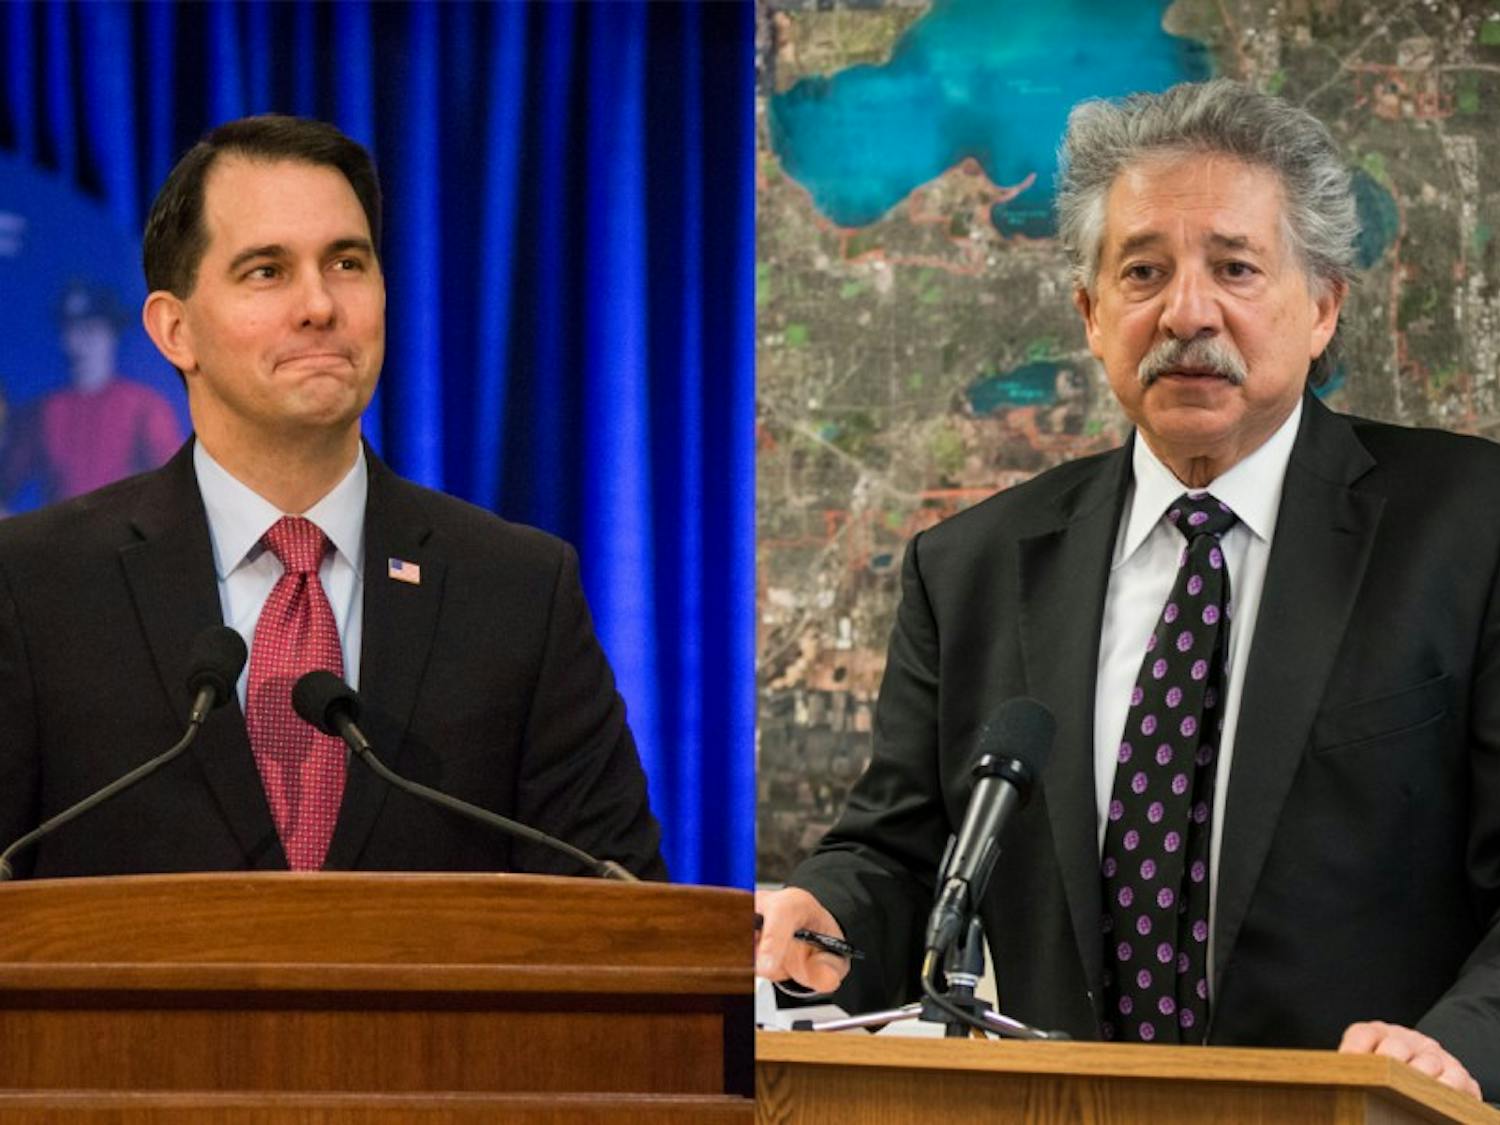 Walker proposes a tax incentive package to a fleeing company to keep manufacturing jobs in Northern Wisconsin.